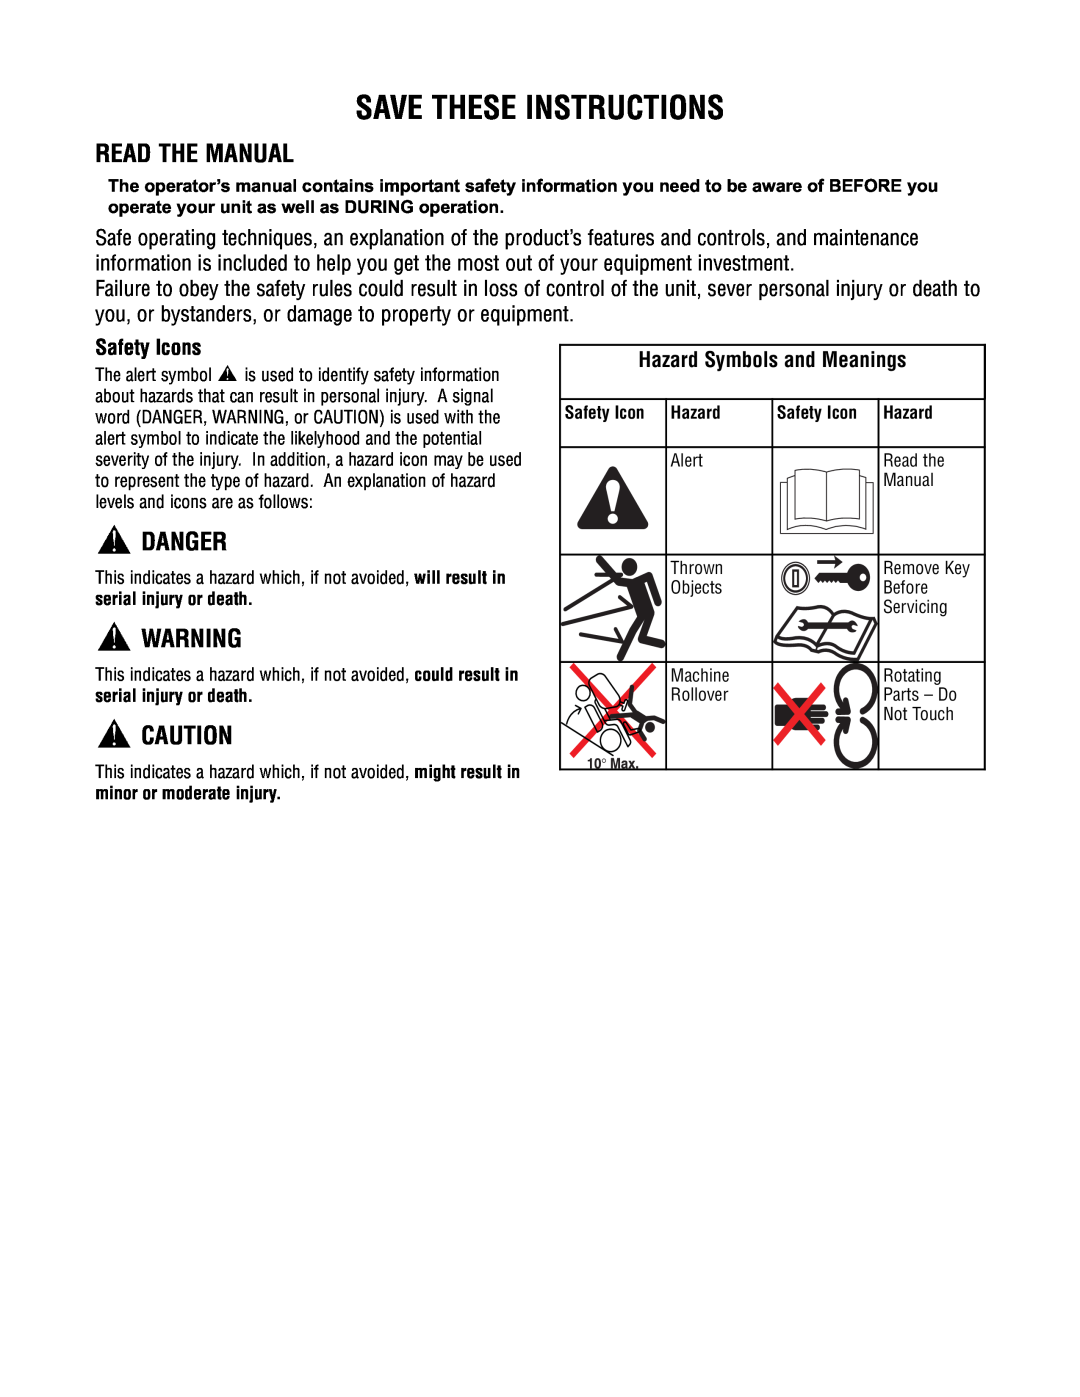 Briggs & Stratton 1695353 Save These Instructions, Read The Manual, Danger, Safety Icons, Hazard Symbols and Meanings 